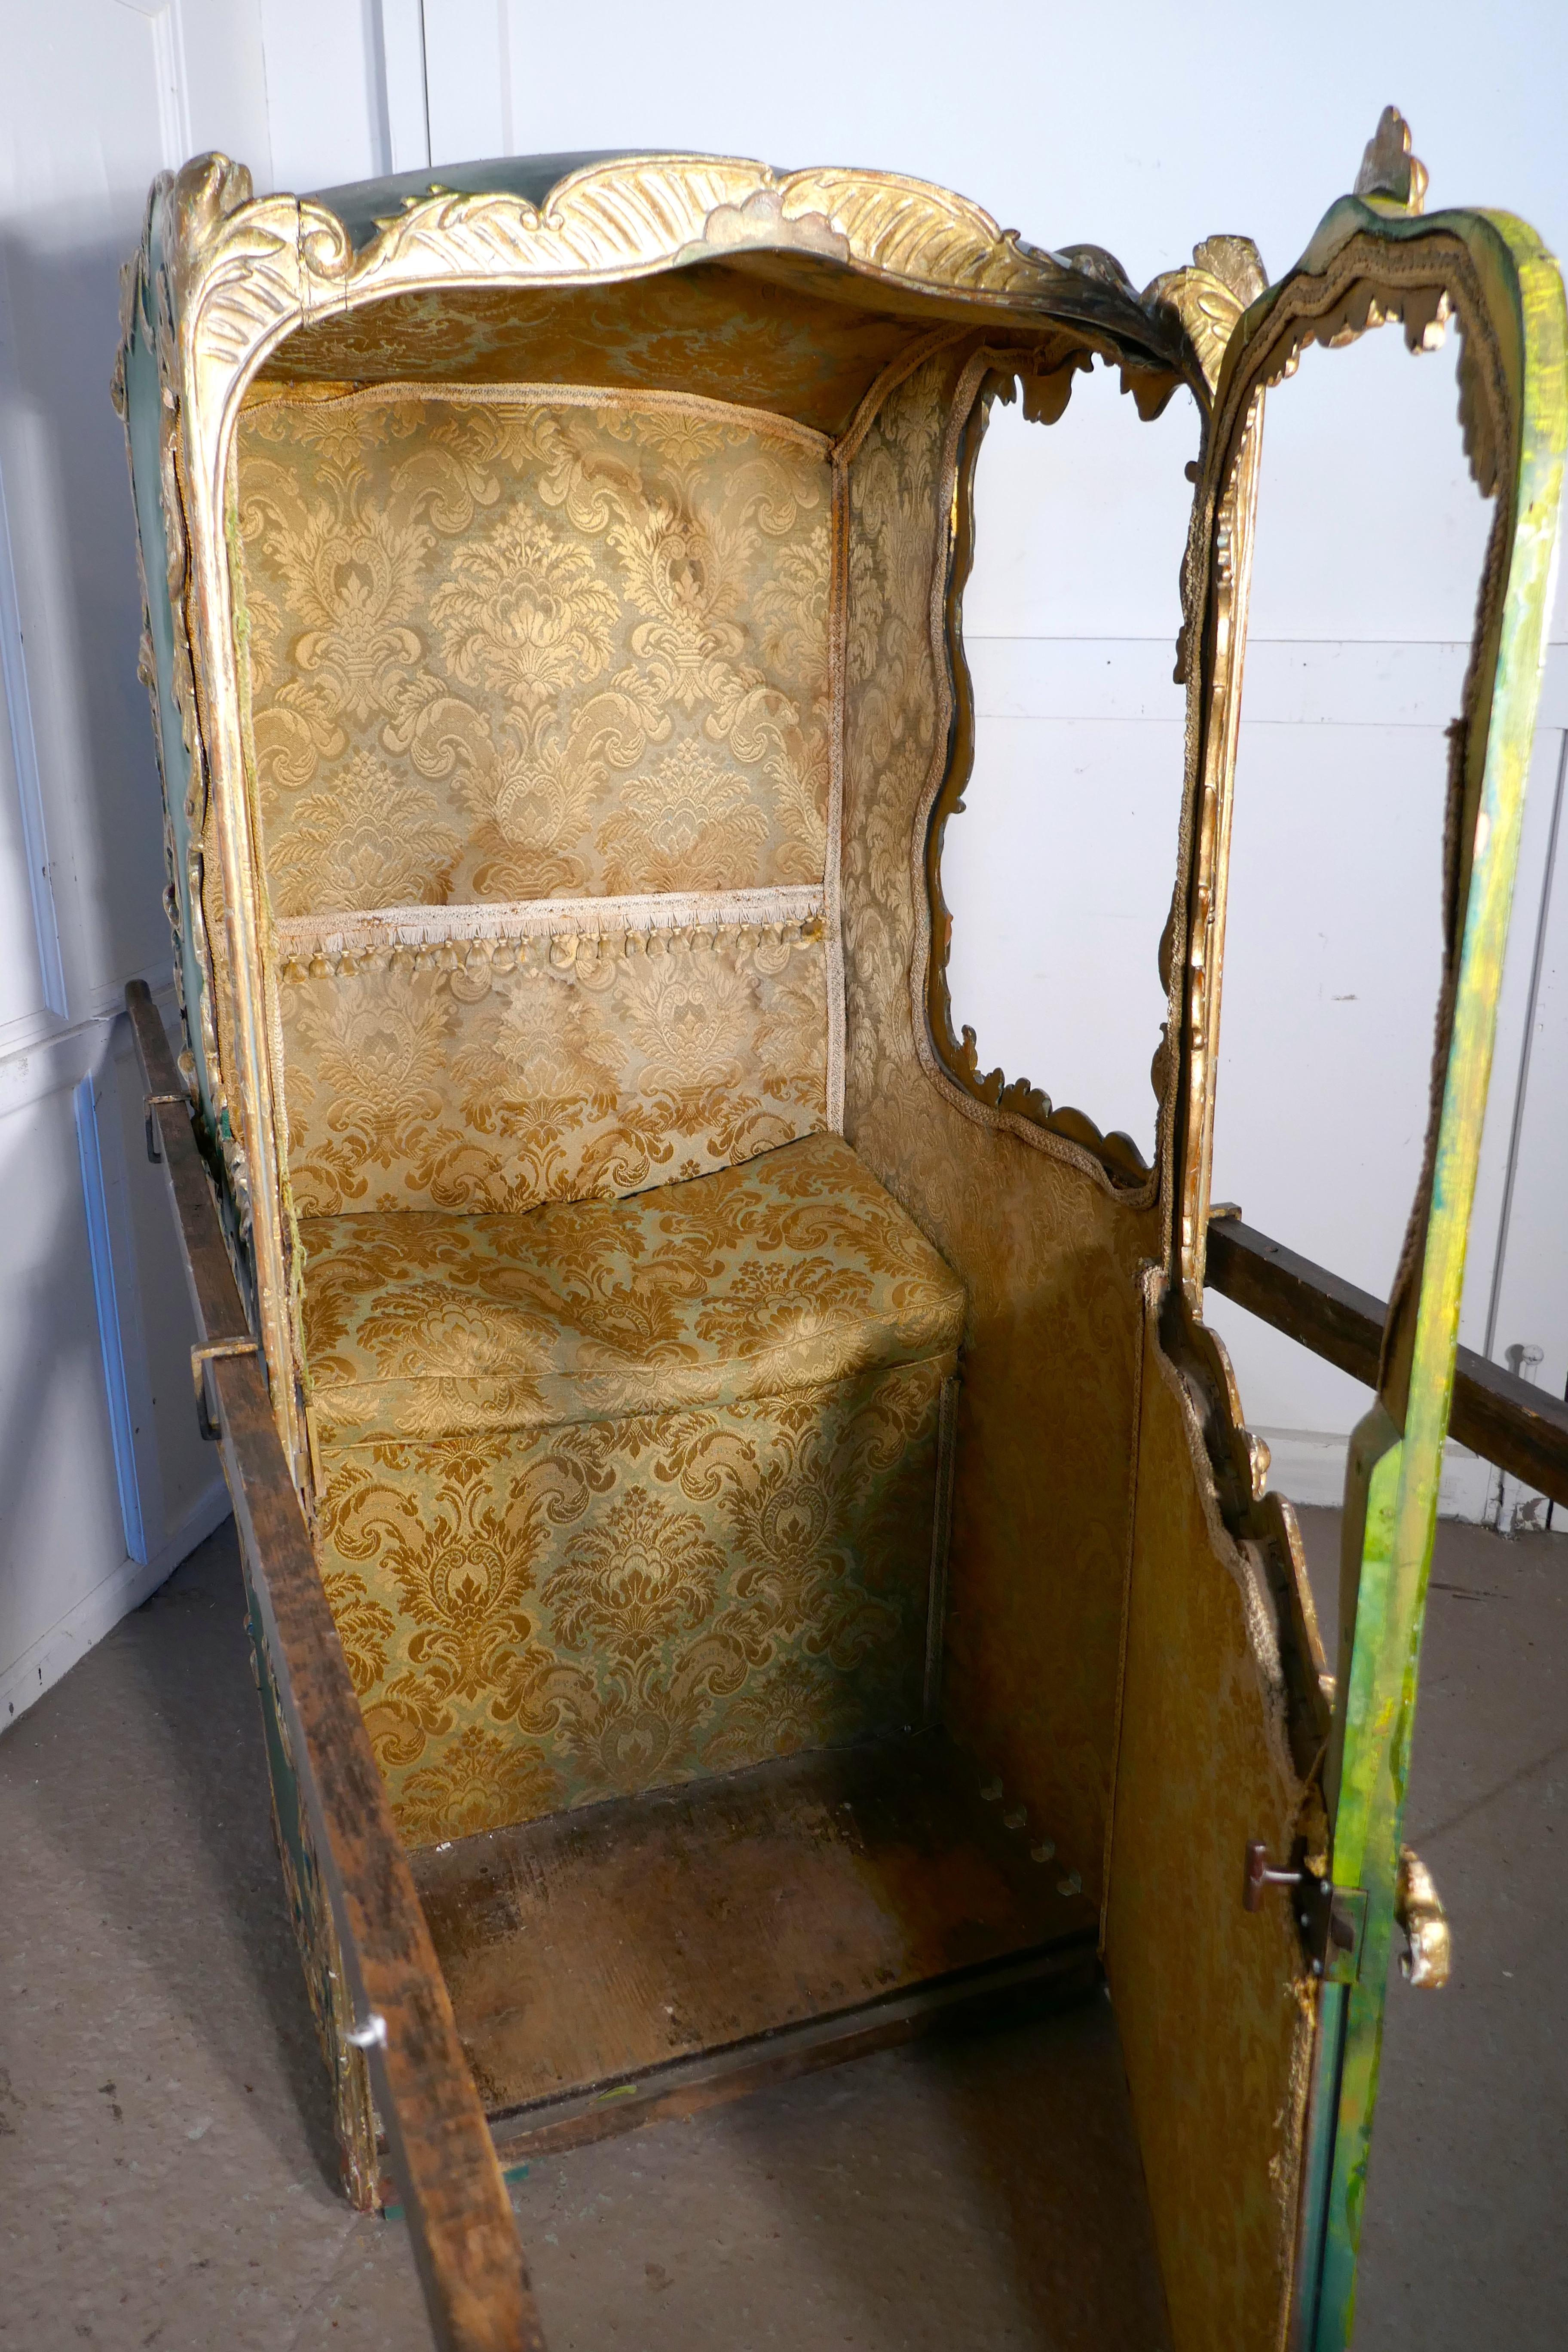 19th Century Italian Sedan Chair  

This is a mid 19th Century piece, it is the Rococo style, in Green and Gold and upholstered inside in a heavy gold brocade, complete with cushion on the seat
The chair has an outward opening door and side windows,